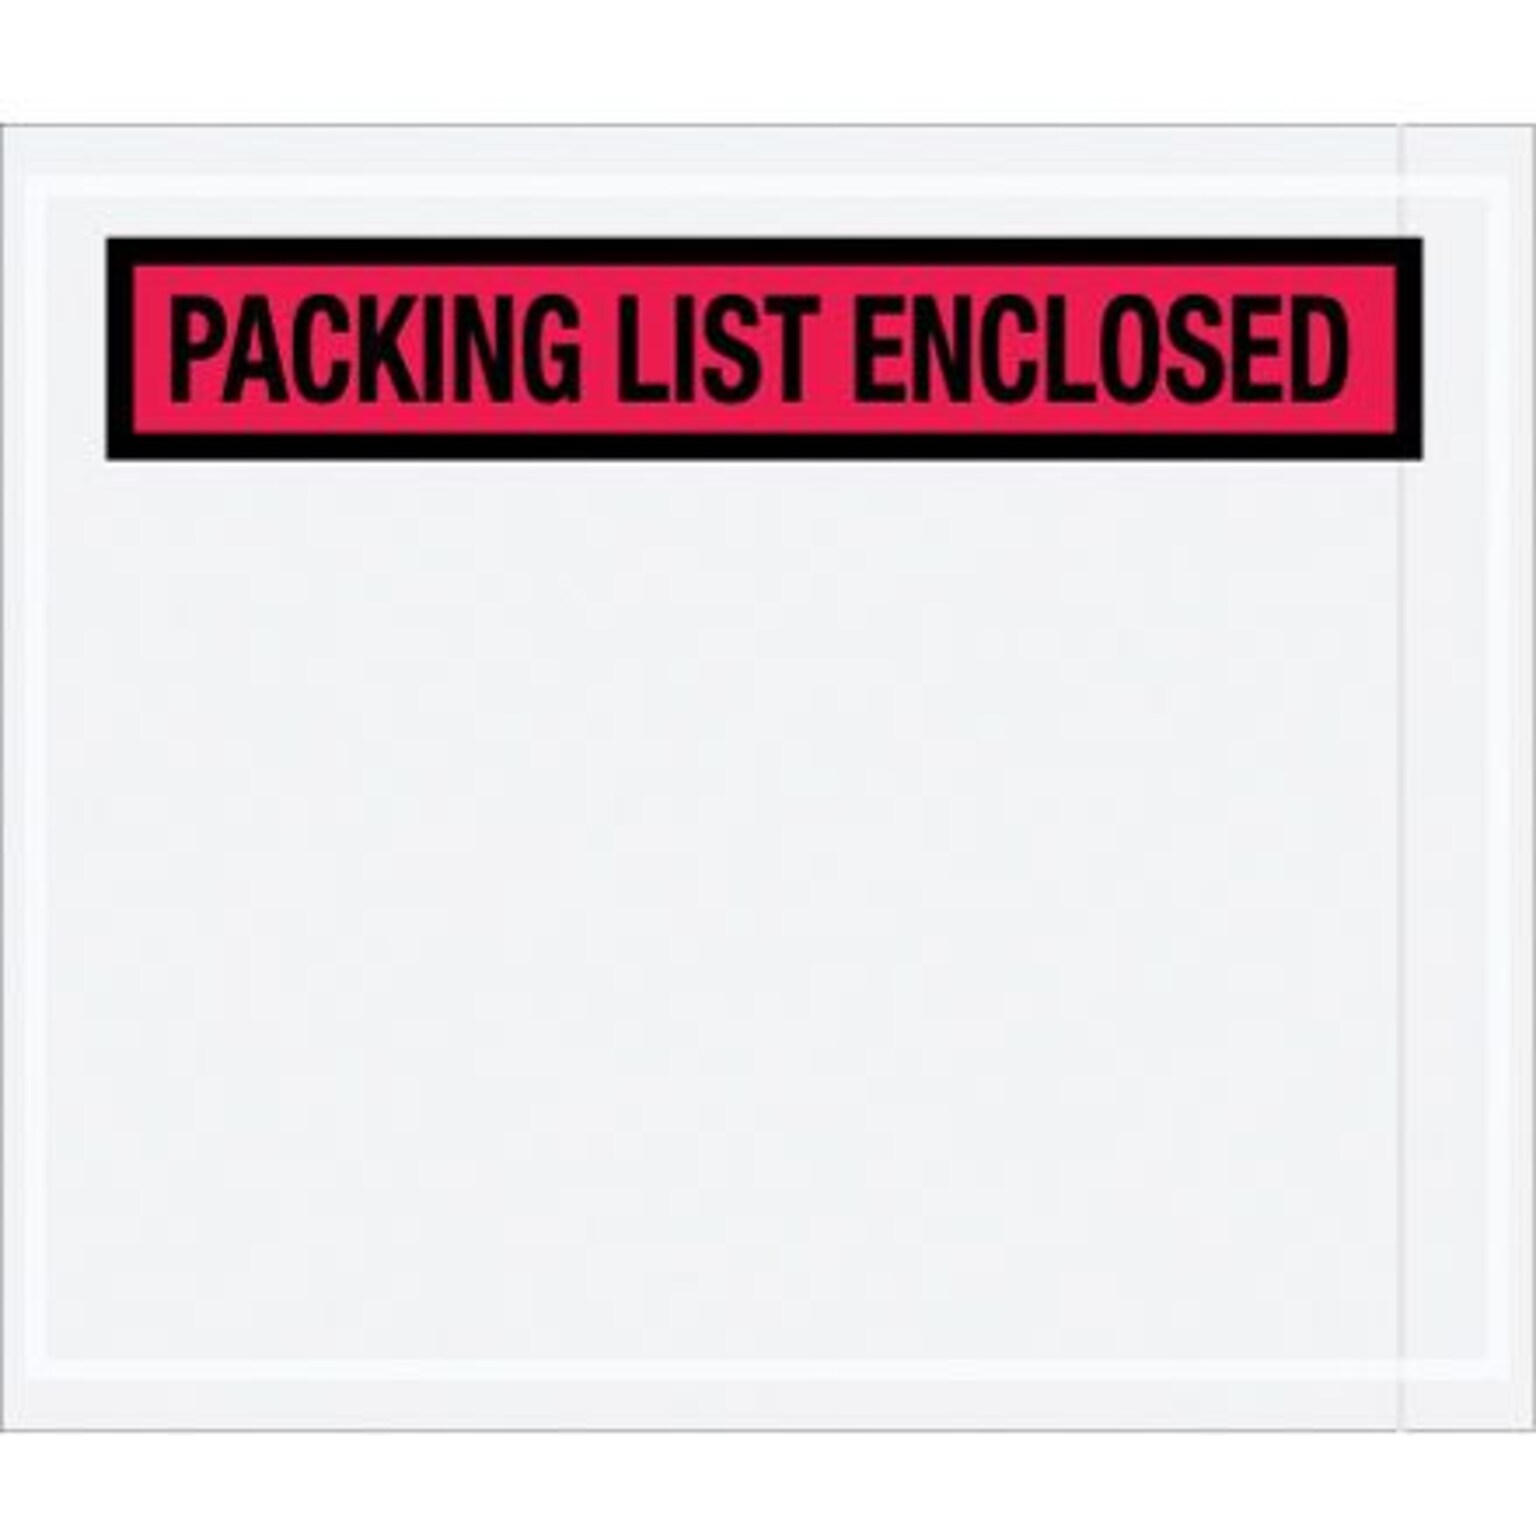 Quill Brand Packing List Envelope, 7 x 6, Red Panel Face, Packing List Enclosed, 1000/Case (PL491)